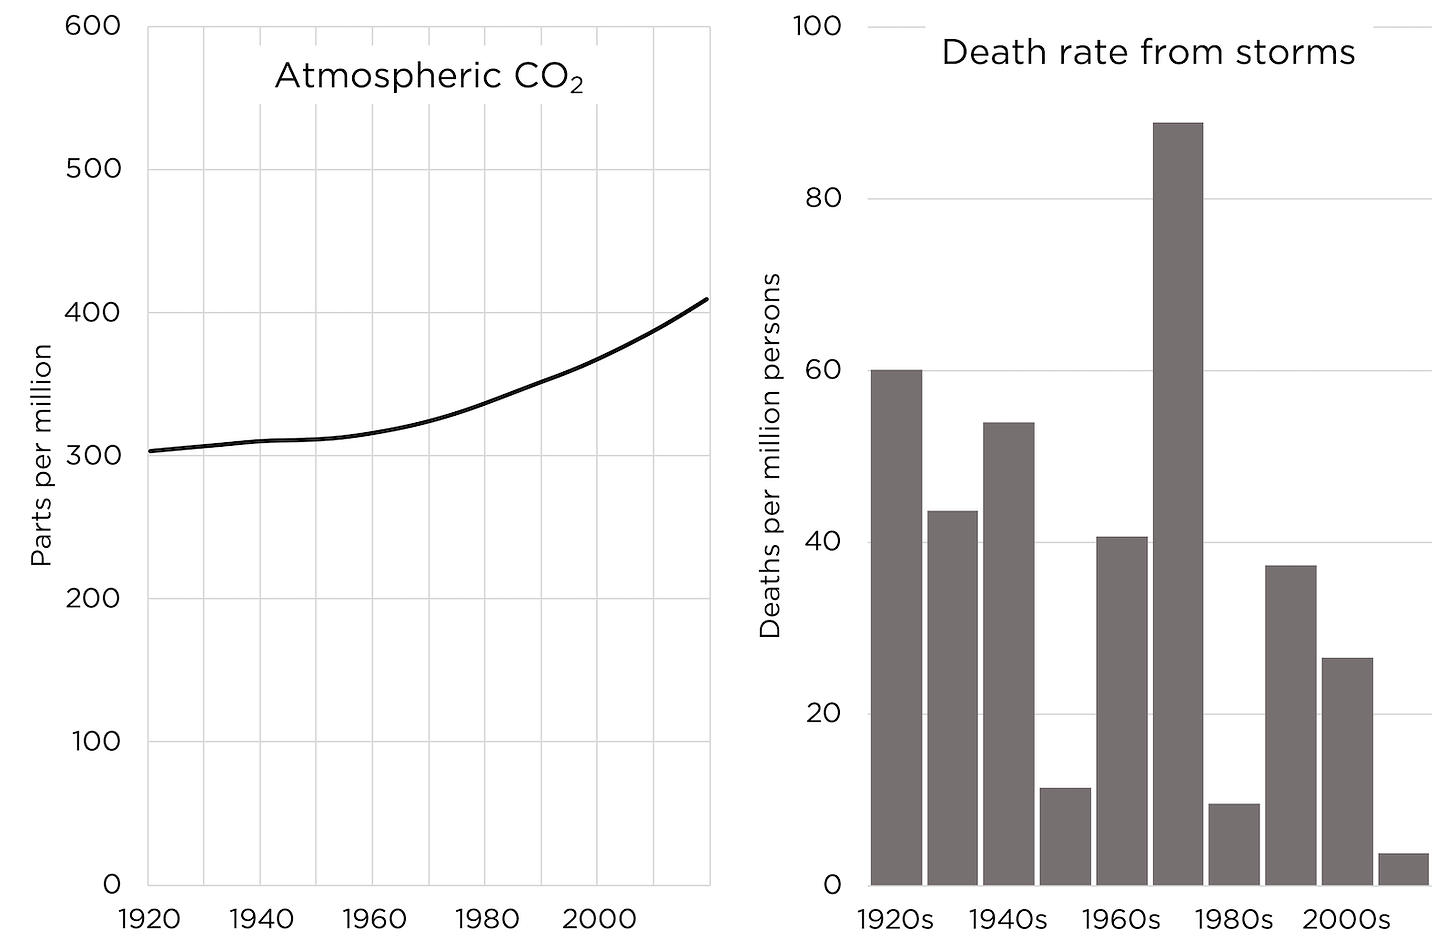 Atmospheric CO2 and Death rate from storms